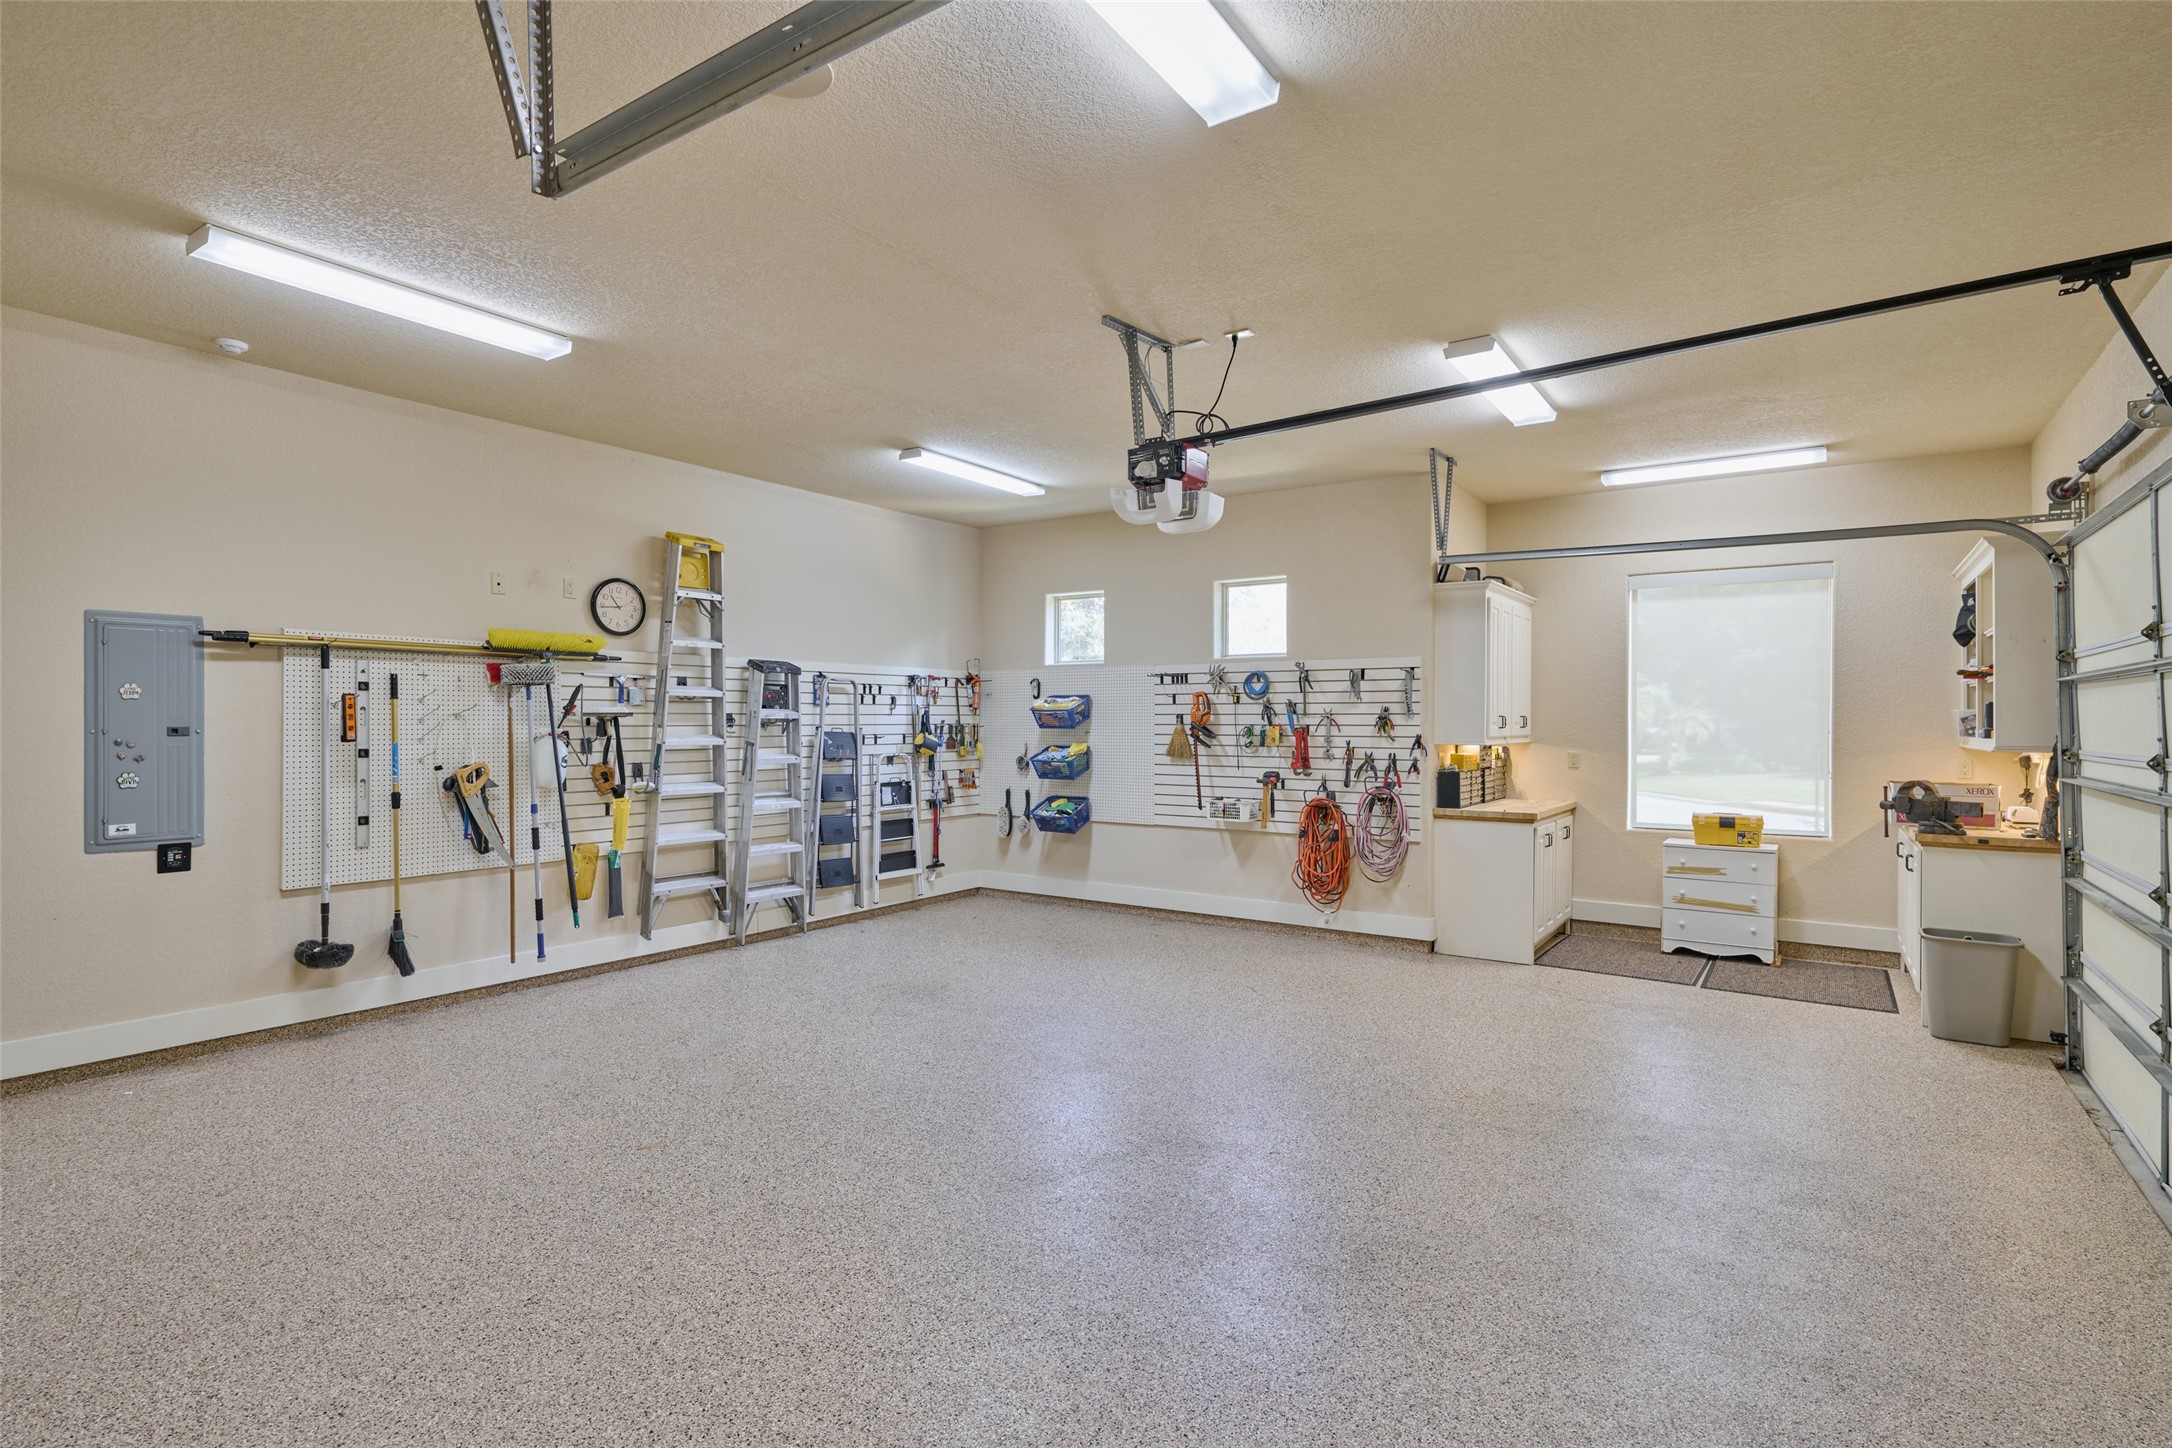 The 2 1/2 car garage (different view) is meticulously maintained and organized, epoxy-coated, butcher-block counters, additional workshop area, pegboards, and more!  On the opposite 2-car garage, you can take the stairs up inside the home and land near the Christmas closet!